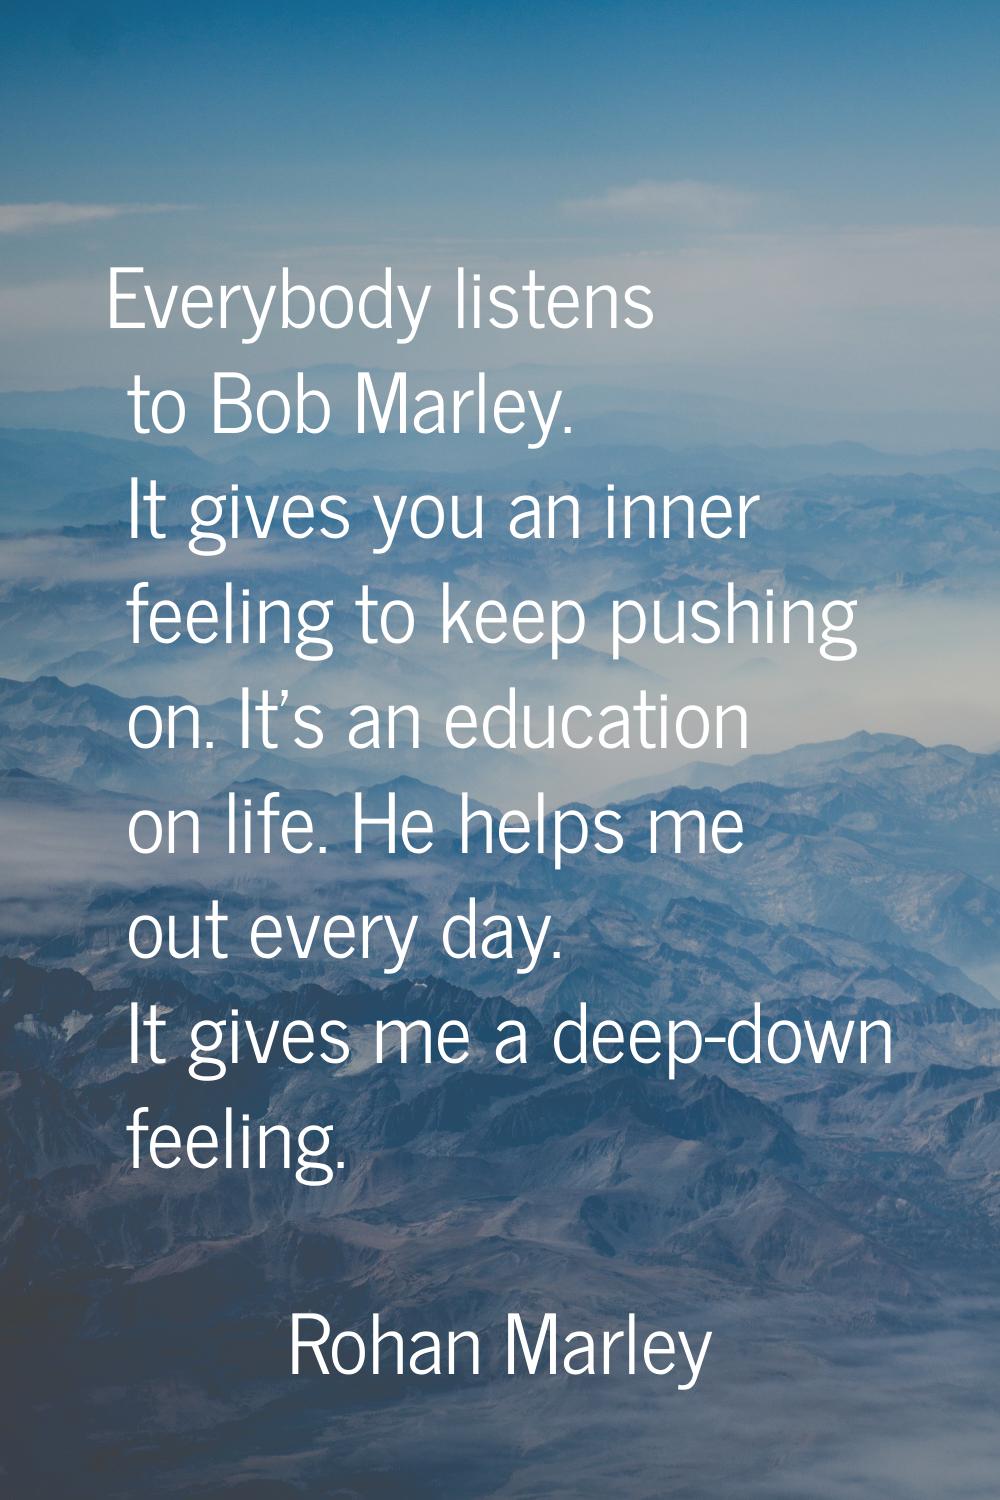 Everybody listens to Bob Marley. It gives you an inner feeling to keep pushing on. It's an educatio